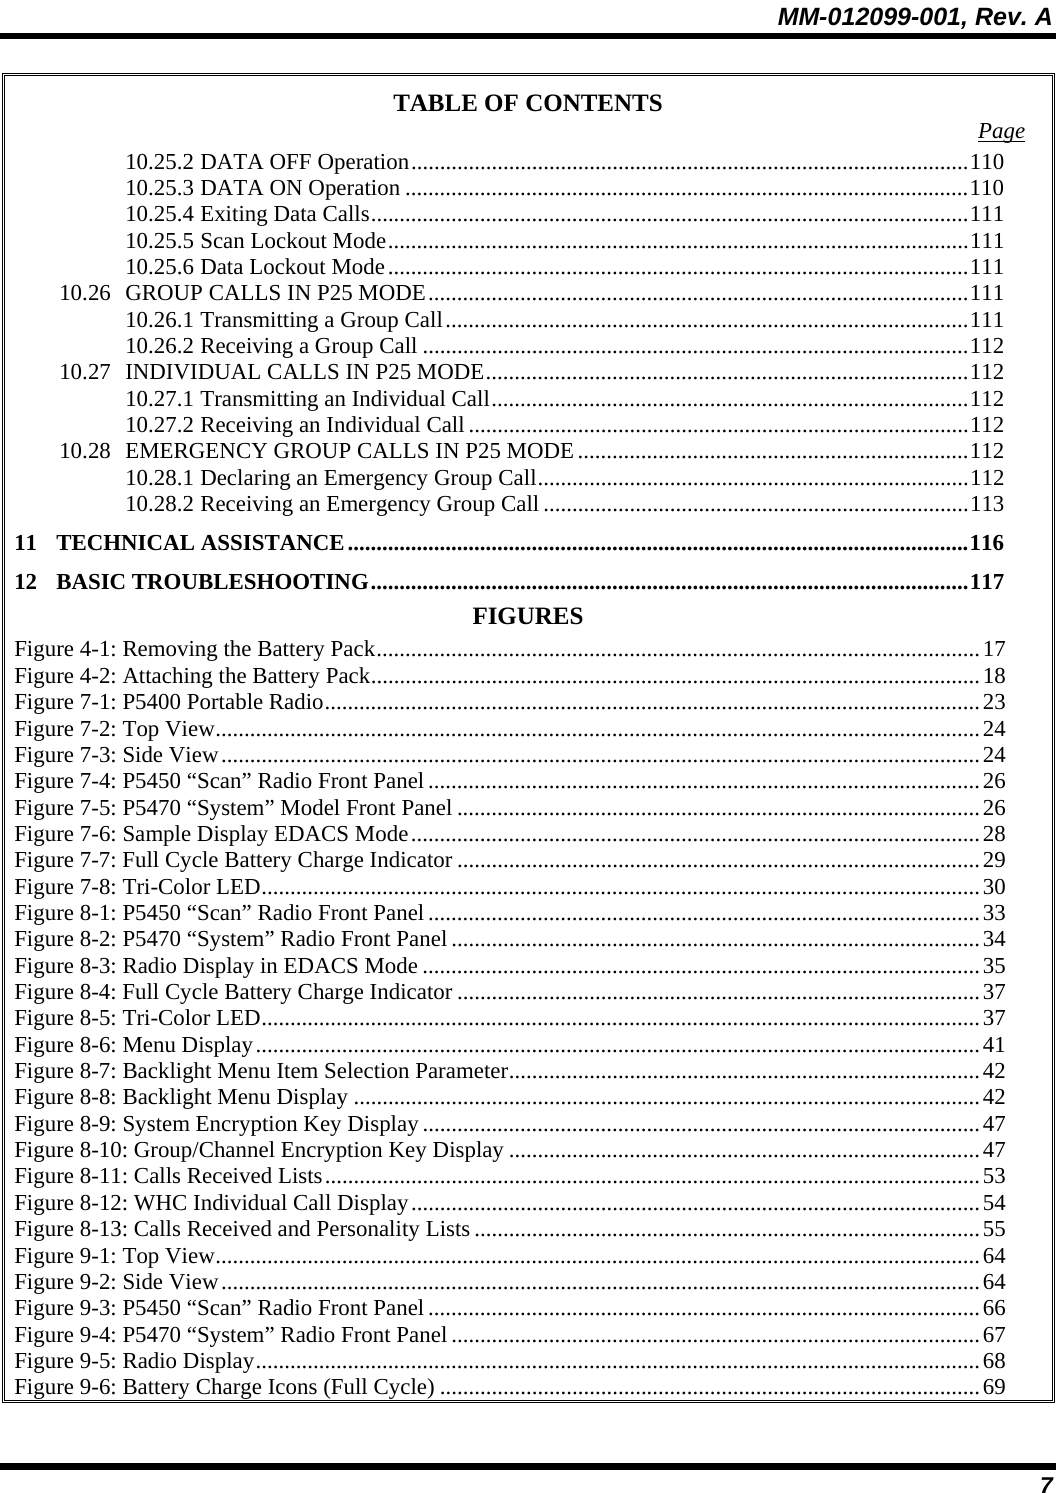 MM-012099-001, Rev. A 7 TABLE OF CONTENTS  Page 10.25.2 DATA OFF Operation.................................................................................................110 10.25.3 DATA ON Operation ..................................................................................................110 10.25.4 Exiting Data Calls........................................................................................................111 10.25.5 Scan Lockout Mode.....................................................................................................111 10.25.6 Data Lockout Mode.....................................................................................................111 10.26 GROUP CALLS IN P25 MODE..............................................................................................111 10.26.1 Transmitting a Group Call...........................................................................................111 10.26.2 Receiving a Group Call ...............................................................................................112 10.27 INDIVIDUAL CALLS IN P25 MODE....................................................................................112 10.27.1 Transmitting an Individual Call...................................................................................112 10.27.2 Receiving an Individual Call .......................................................................................112 10.28 EMERGENCY GROUP CALLS IN P25 MODE....................................................................112 10.28.1 Declaring an Emergency Group Call...........................................................................112 10.28.2 Receiving an Emergency Group Call ..........................................................................113 11 TECHNICAL ASSISTANCE............................................................................................................116 12 BASIC TROUBLESHOOTING........................................................................................................117 FIGURES Figure 4-1: Removing the Battery Pack.........................................................................................................17 Figure 4-2: Attaching the Battery Pack..........................................................................................................18 Figure 7-1: P5400 Portable Radio..................................................................................................................23 Figure 7-2: Top View.....................................................................................................................................24 Figure 7-3: Side View....................................................................................................................................24 Figure 7-4: P5450 “Scan” Radio Front Panel................................................................................................26 Figure 7-5: P5470 “System” Model Front Panel ...........................................................................................26 Figure 7-6: Sample Display EDACS Mode...................................................................................................28 Figure 7-7: Full Cycle Battery Charge Indicator ...........................................................................................29 Figure 7-8: Tri-Color LED.............................................................................................................................30 Figure 8-1: P5450 “Scan” Radio Front Panel................................................................................................33 Figure 8-2: P5470 “System” Radio Front Panel ............................................................................................34 Figure 8-3: Radio Display in EDACS Mode .................................................................................................35 Figure 8-4: Full Cycle Battery Charge Indicator ...........................................................................................37 Figure 8-5: Tri-Color LED.............................................................................................................................37 Figure 8-6: Menu Display..............................................................................................................................41 Figure 8-7: Backlight Menu Item Selection Parameter..................................................................................42 Figure 8-8: Backlight Menu Display .............................................................................................................42 Figure 8-9: System Encryption Key Display .................................................................................................47 Figure 8-10: Group/Channel Encryption Key Display ..................................................................................47 Figure 8-11: Calls Received Lists..................................................................................................................53 Figure 8-12: WHC Individual Call Display...................................................................................................54 Figure 8-13: Calls Received and Personality Lists ........................................................................................55 Figure 9-1: Top View.....................................................................................................................................64 Figure 9-2: Side View....................................................................................................................................64 Figure 9-3: P5450 “Scan” Radio Front Panel................................................................................................66 Figure 9-4: P5470 “System” Radio Front Panel ............................................................................................67 Figure 9-5: Radio Display..............................................................................................................................68 Figure 9-6: Battery Charge Icons (Full Cycle) ..............................................................................................69 